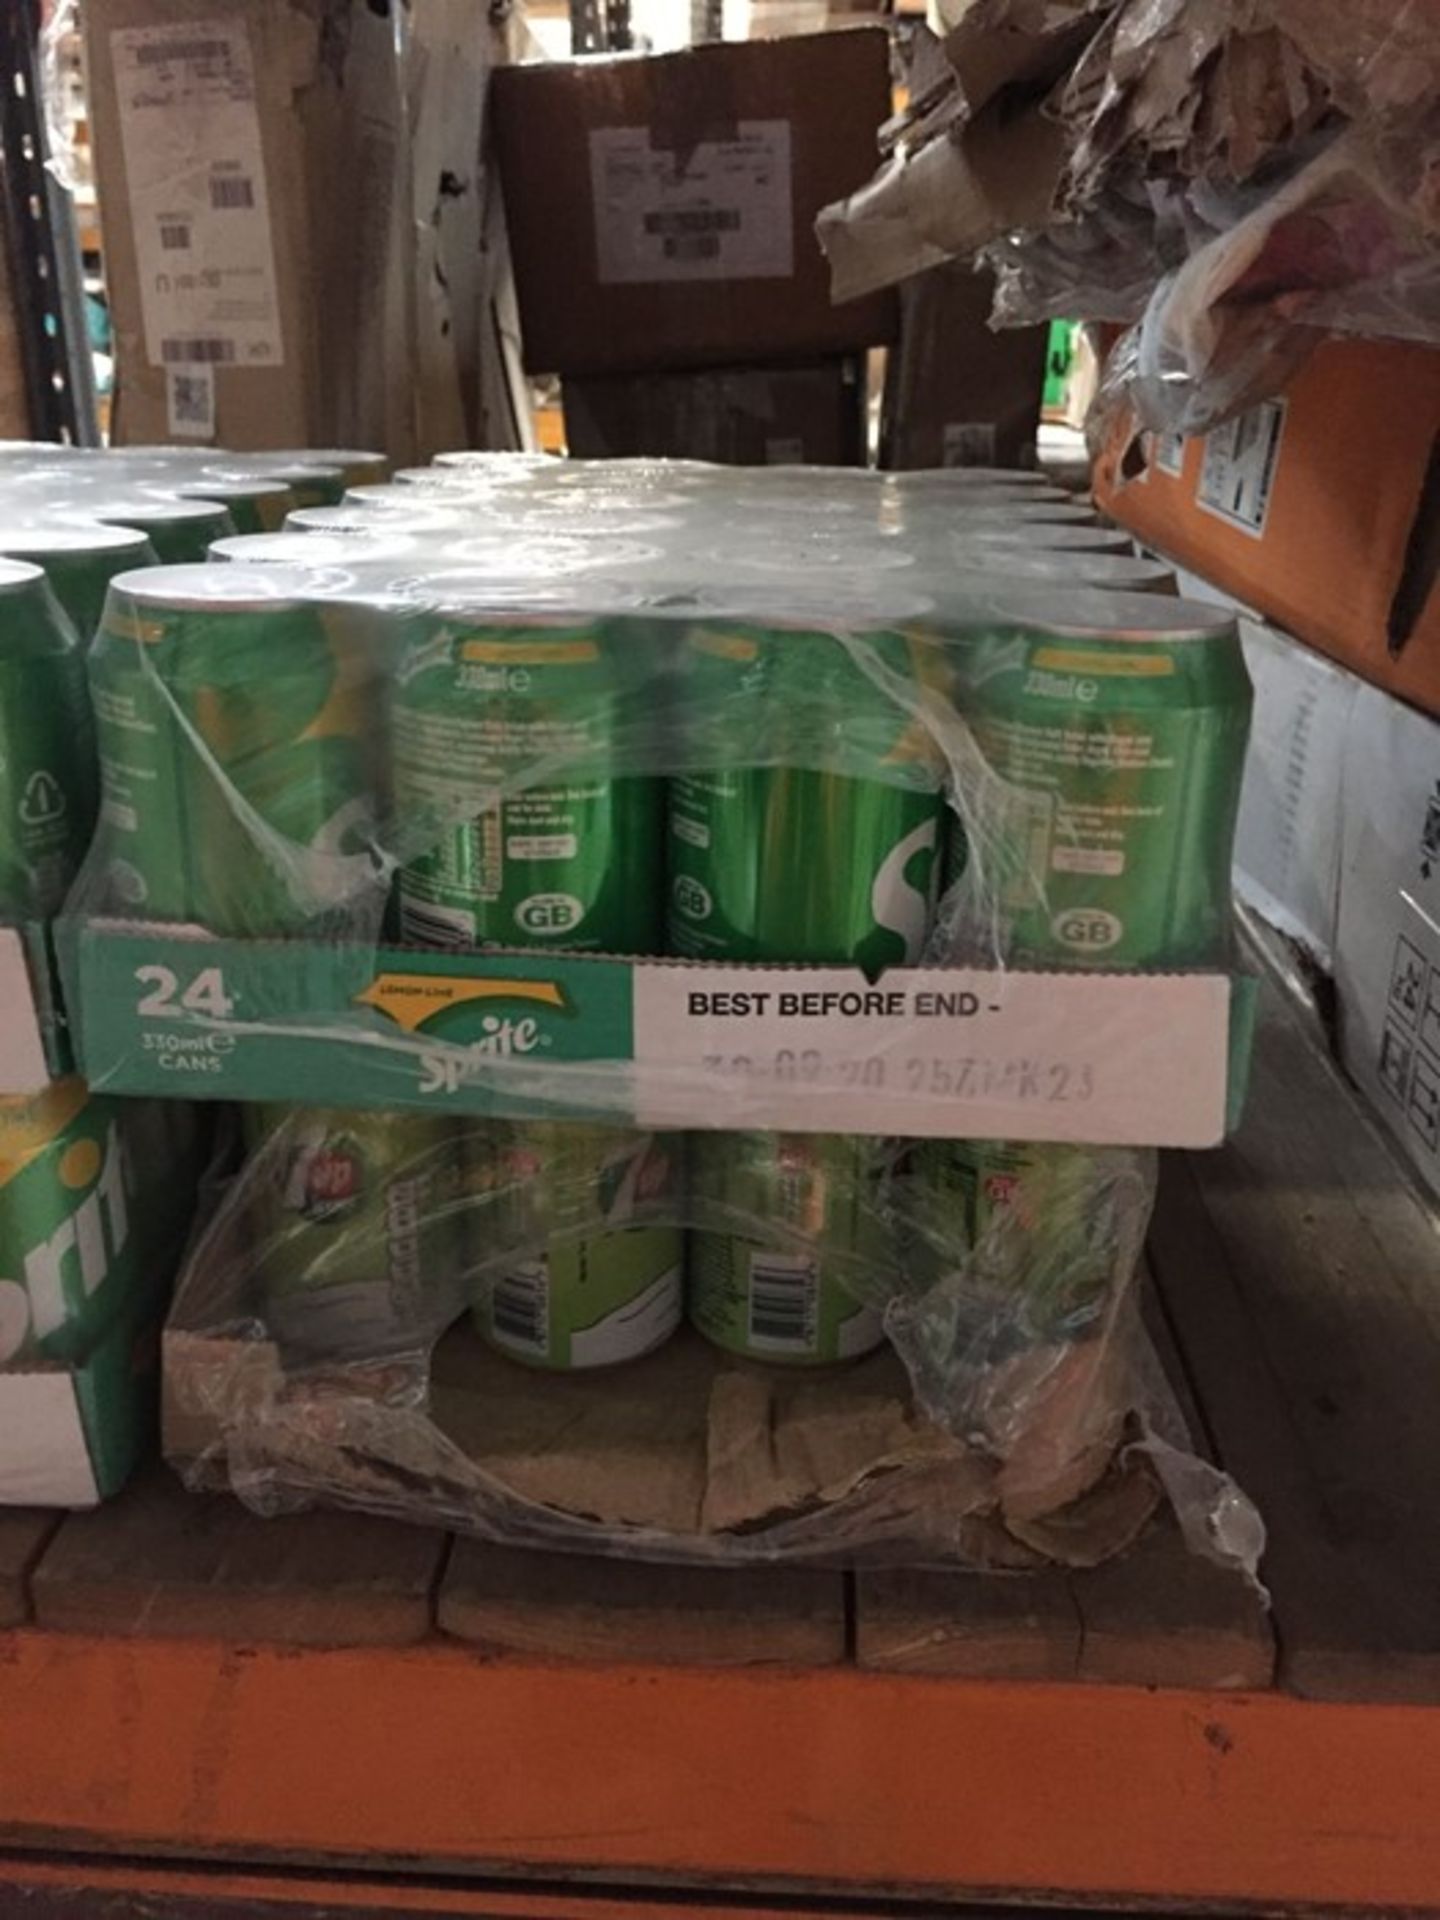 1 LOT TO CONTAIN 48 CANS OF SPRITE 330 ML - BB 30 SEP - 20 - BOXED